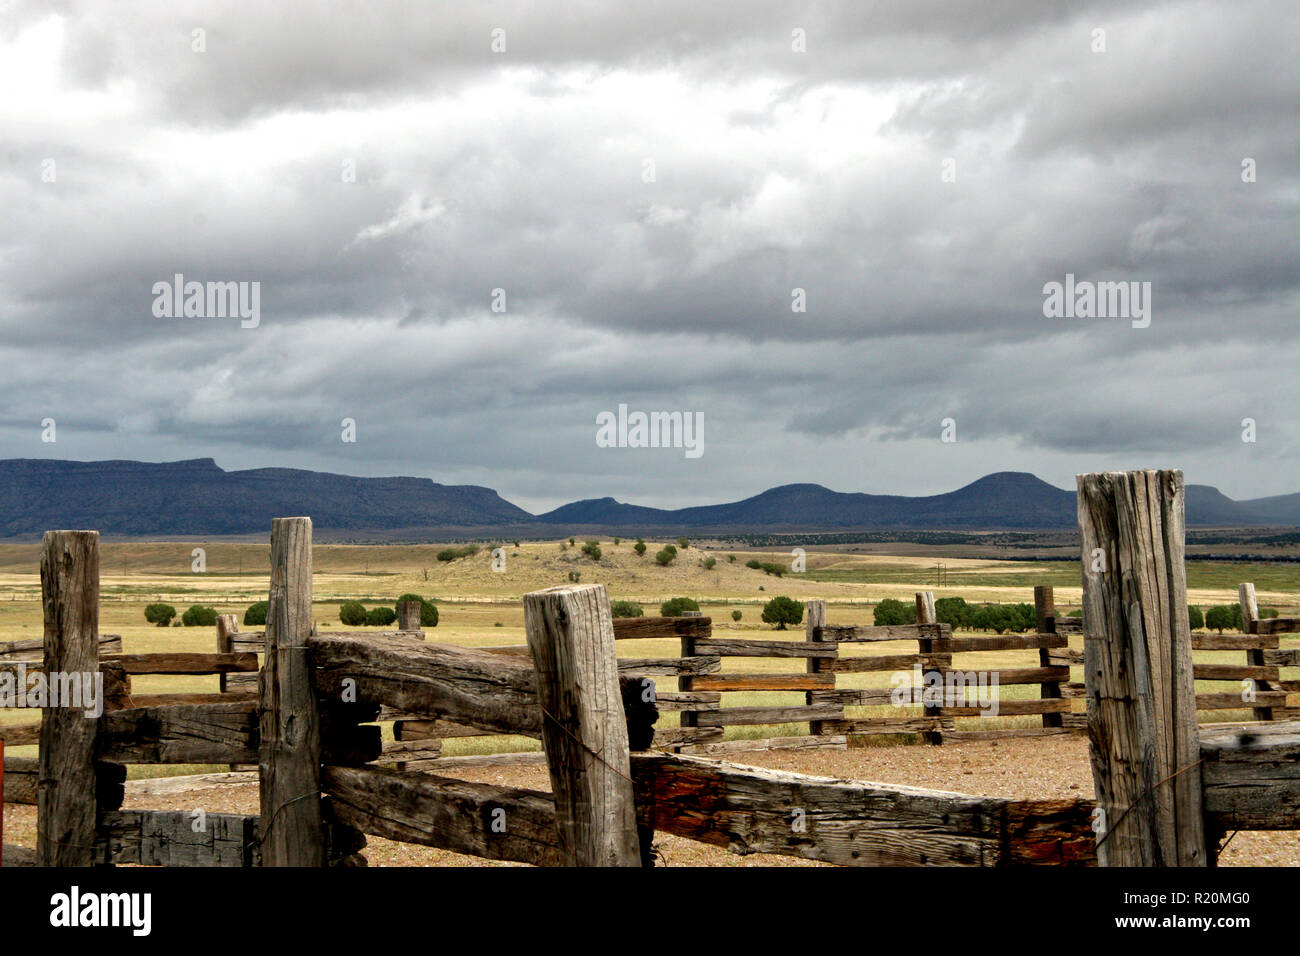 Arizona high desert ranch life wood fencing corrals overlooking rolling hills and mountains Stock Photo